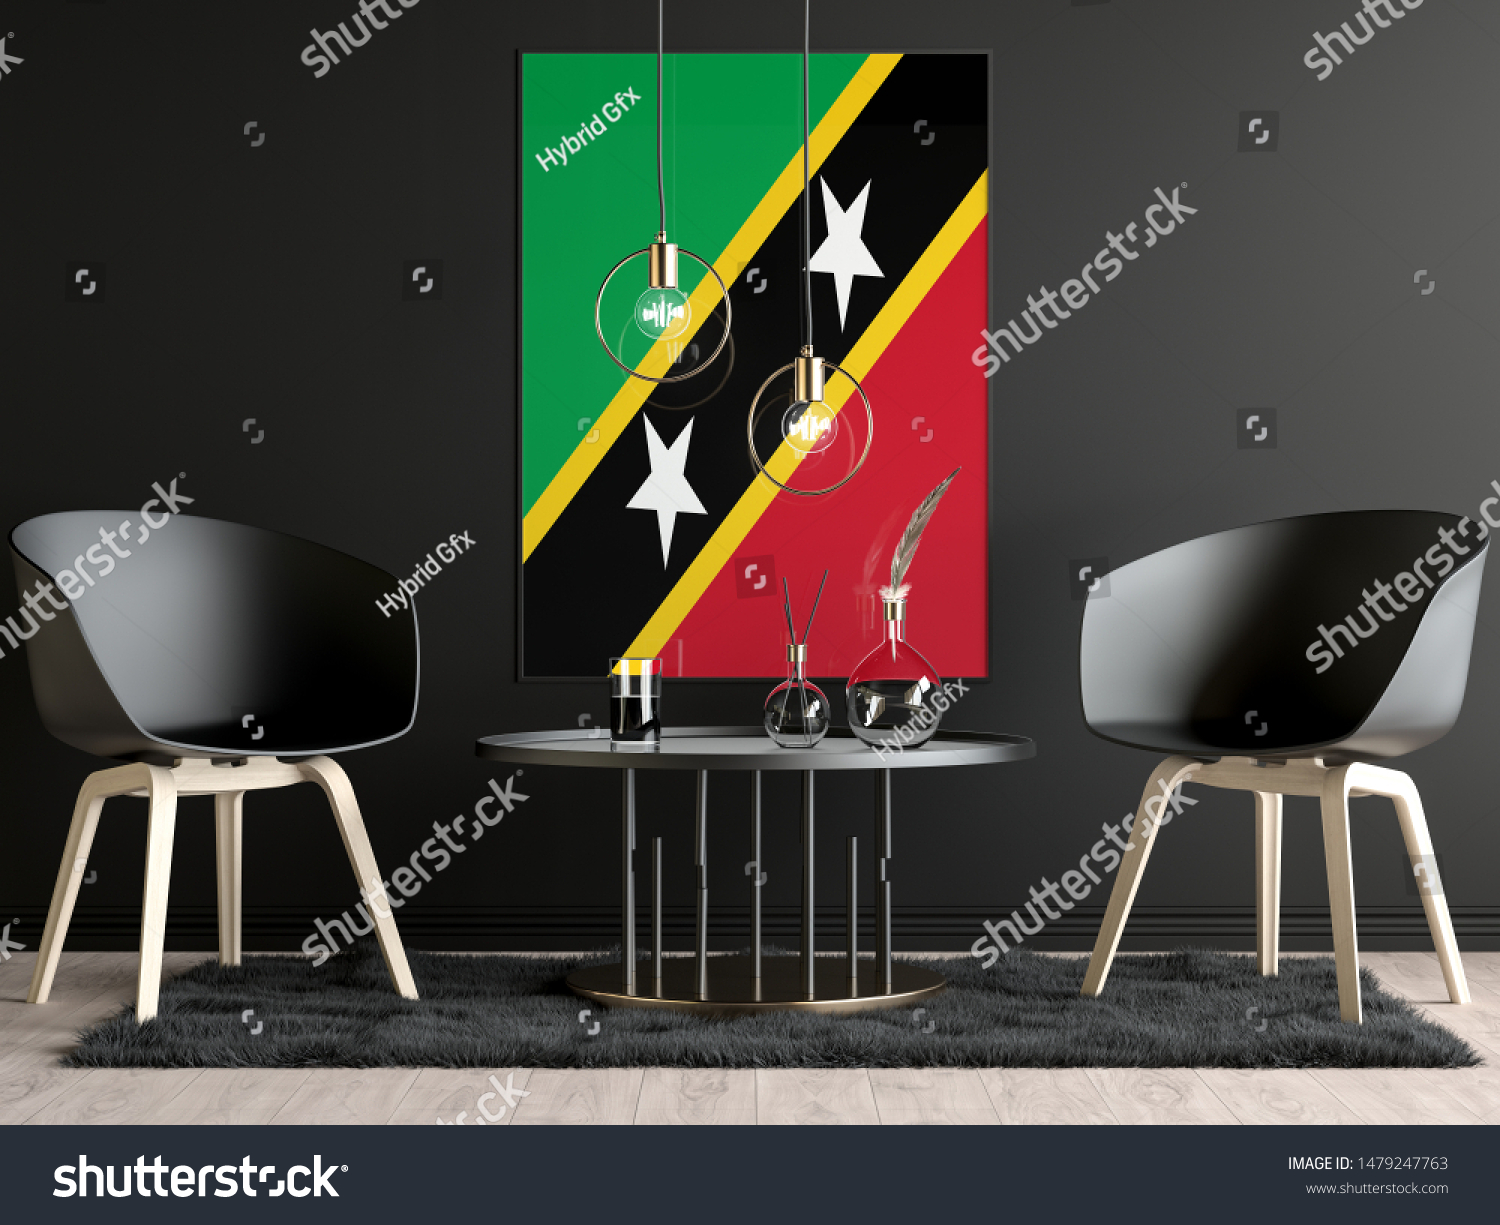 Saint Kitts and Nevis Flag in Room, Saint Kitts and Nevis Flag in Photo Frame #1479247763